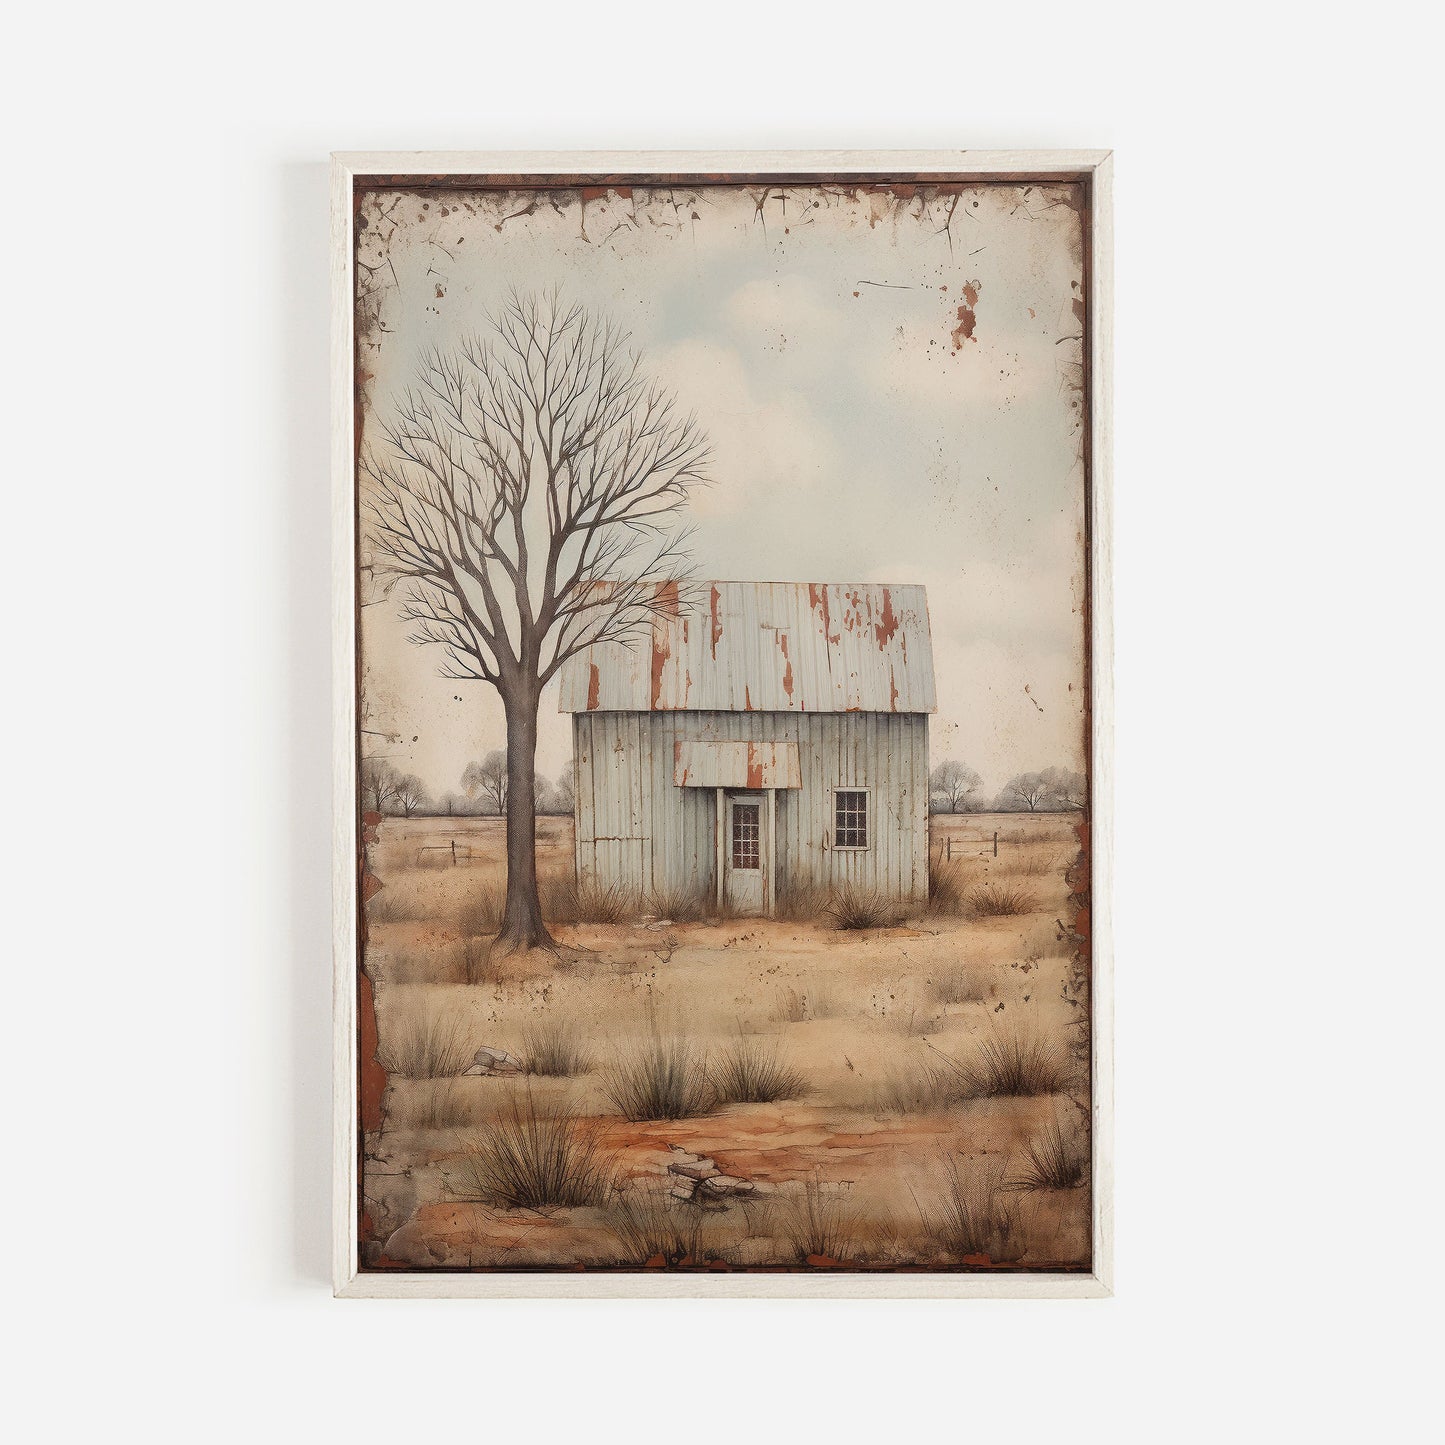 Little Old House Countryside Print, Rustic Farmhouse Wall Decor, Vintage Country Home Decor, Country Cottage Print, DIGITAL Printable Art